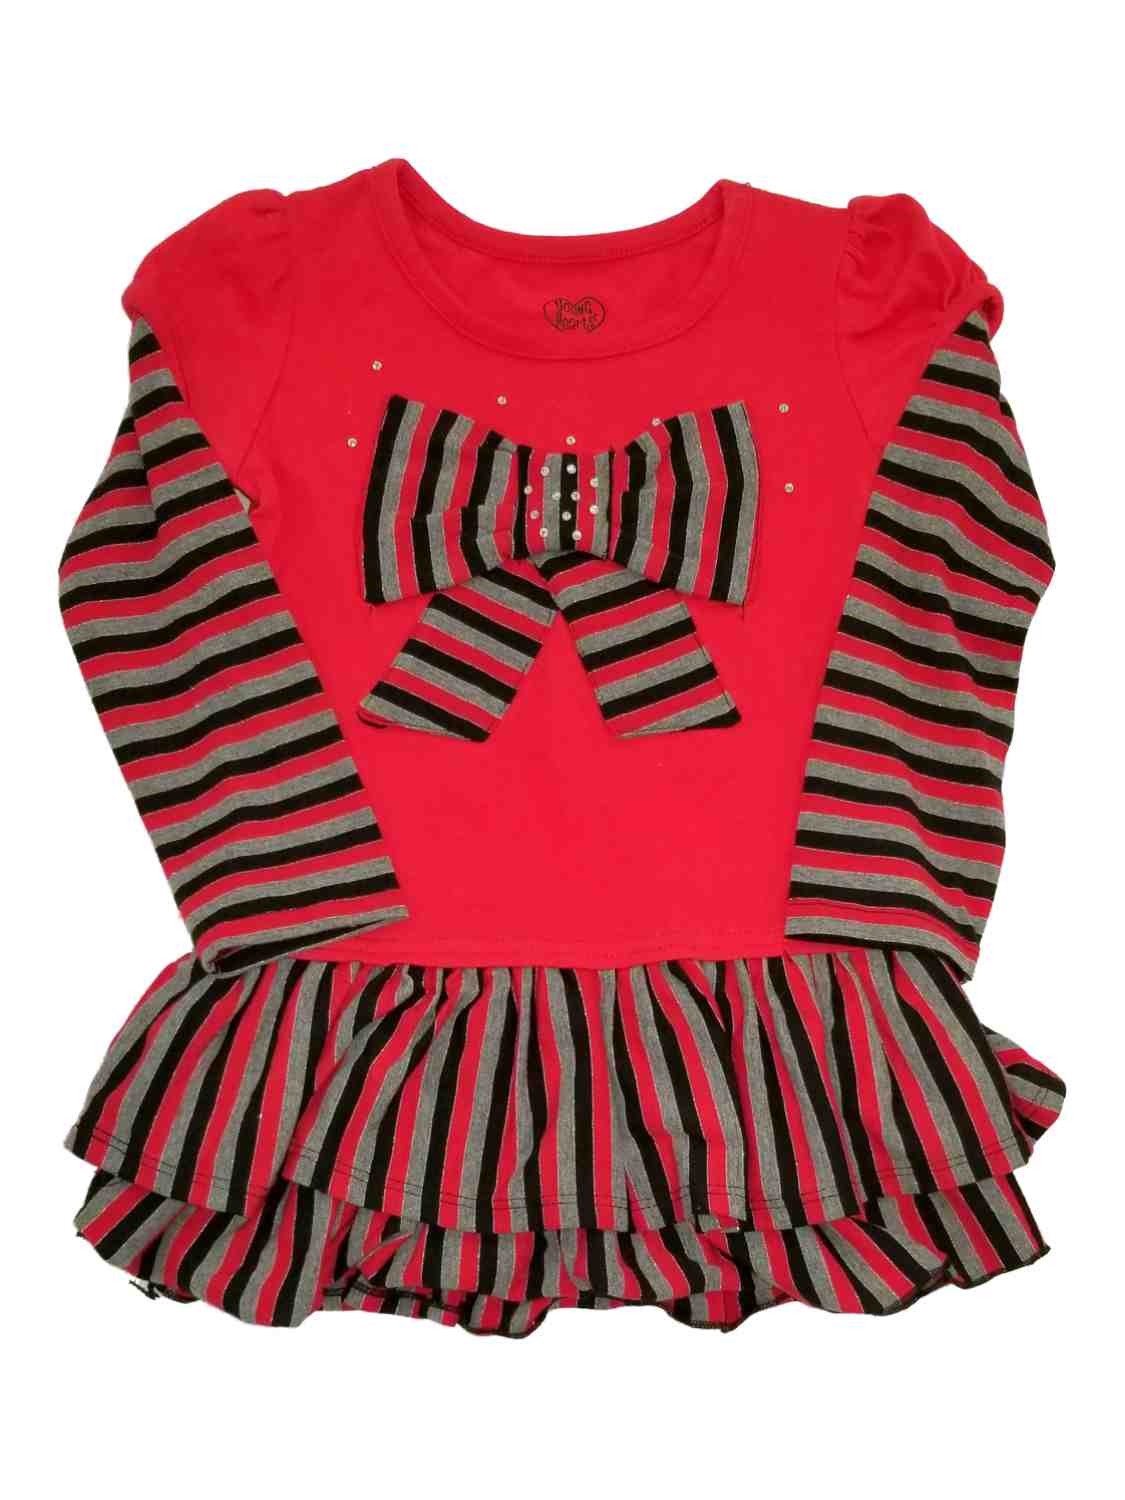 Young Hearts Infant Toddler Girls Red Stripe Bow Christmas Holiday Party Dress Black Grey 3T